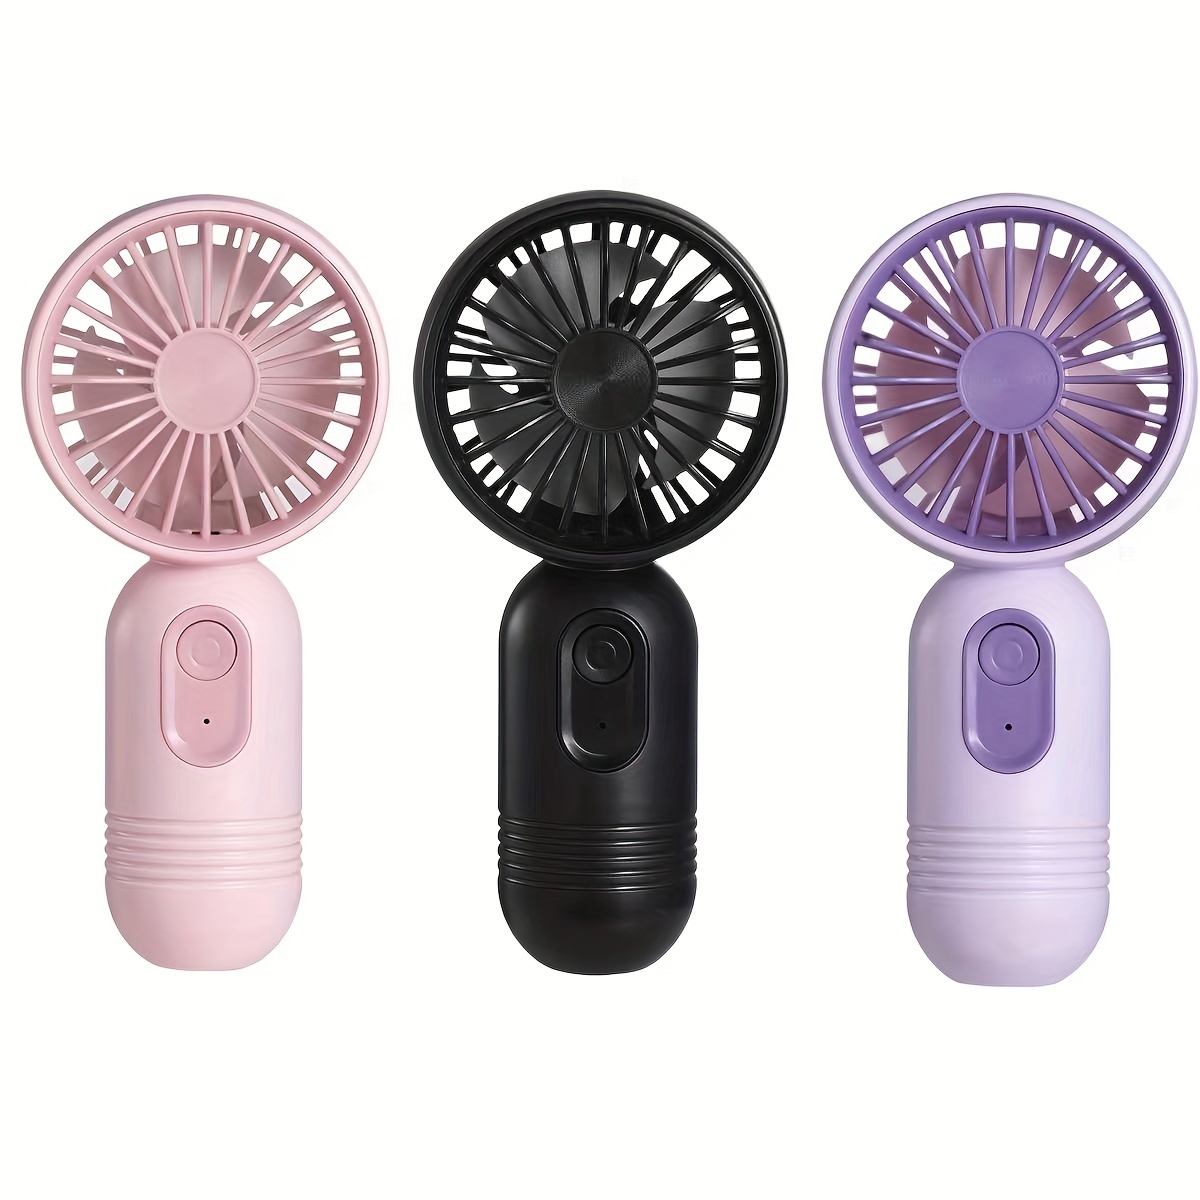 

1pc Mini Portable Fan, Usb Rechargeable, With 3 Speeds, Handheld Fan For Women, Desktop Fan For Hot Weather, Suitable For Office, Outdoor, Travel And Camping